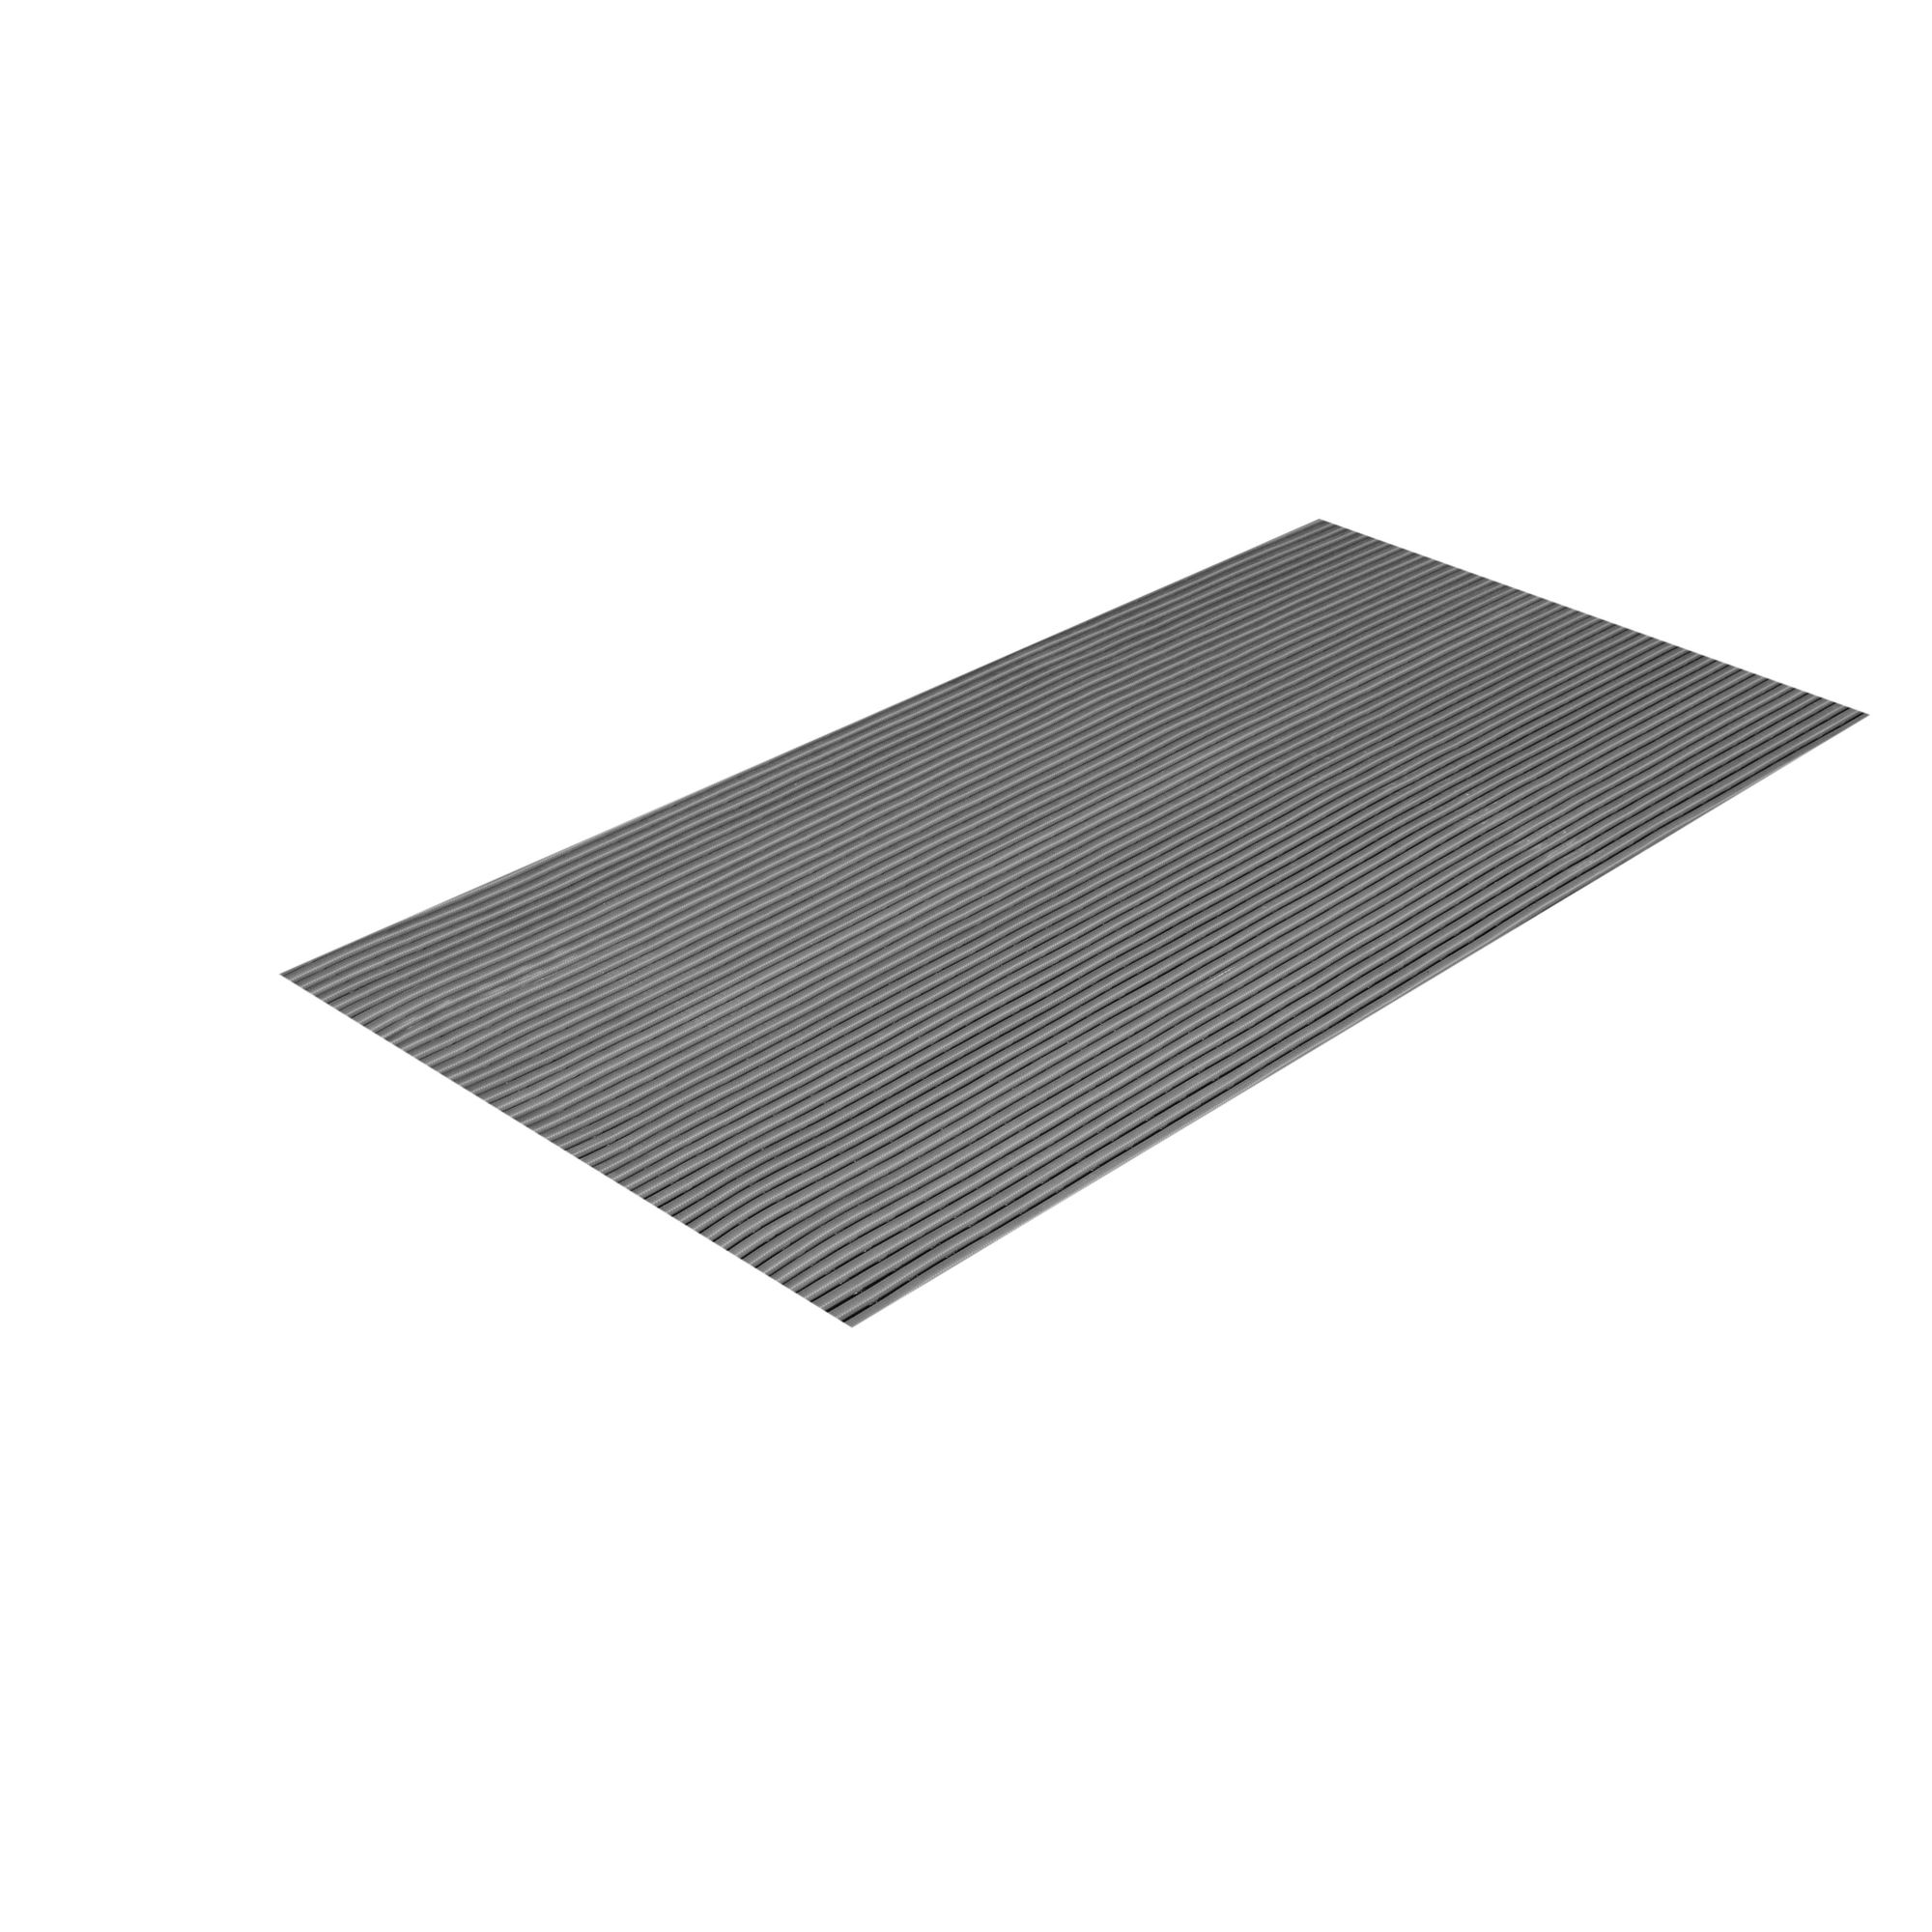 Crown Matting Technologies, Sani-Tred 3ft.x40ft. Charcoal, Width 36 in, Length 480 in, Thickness 15/32 in, Model HVR0036CH